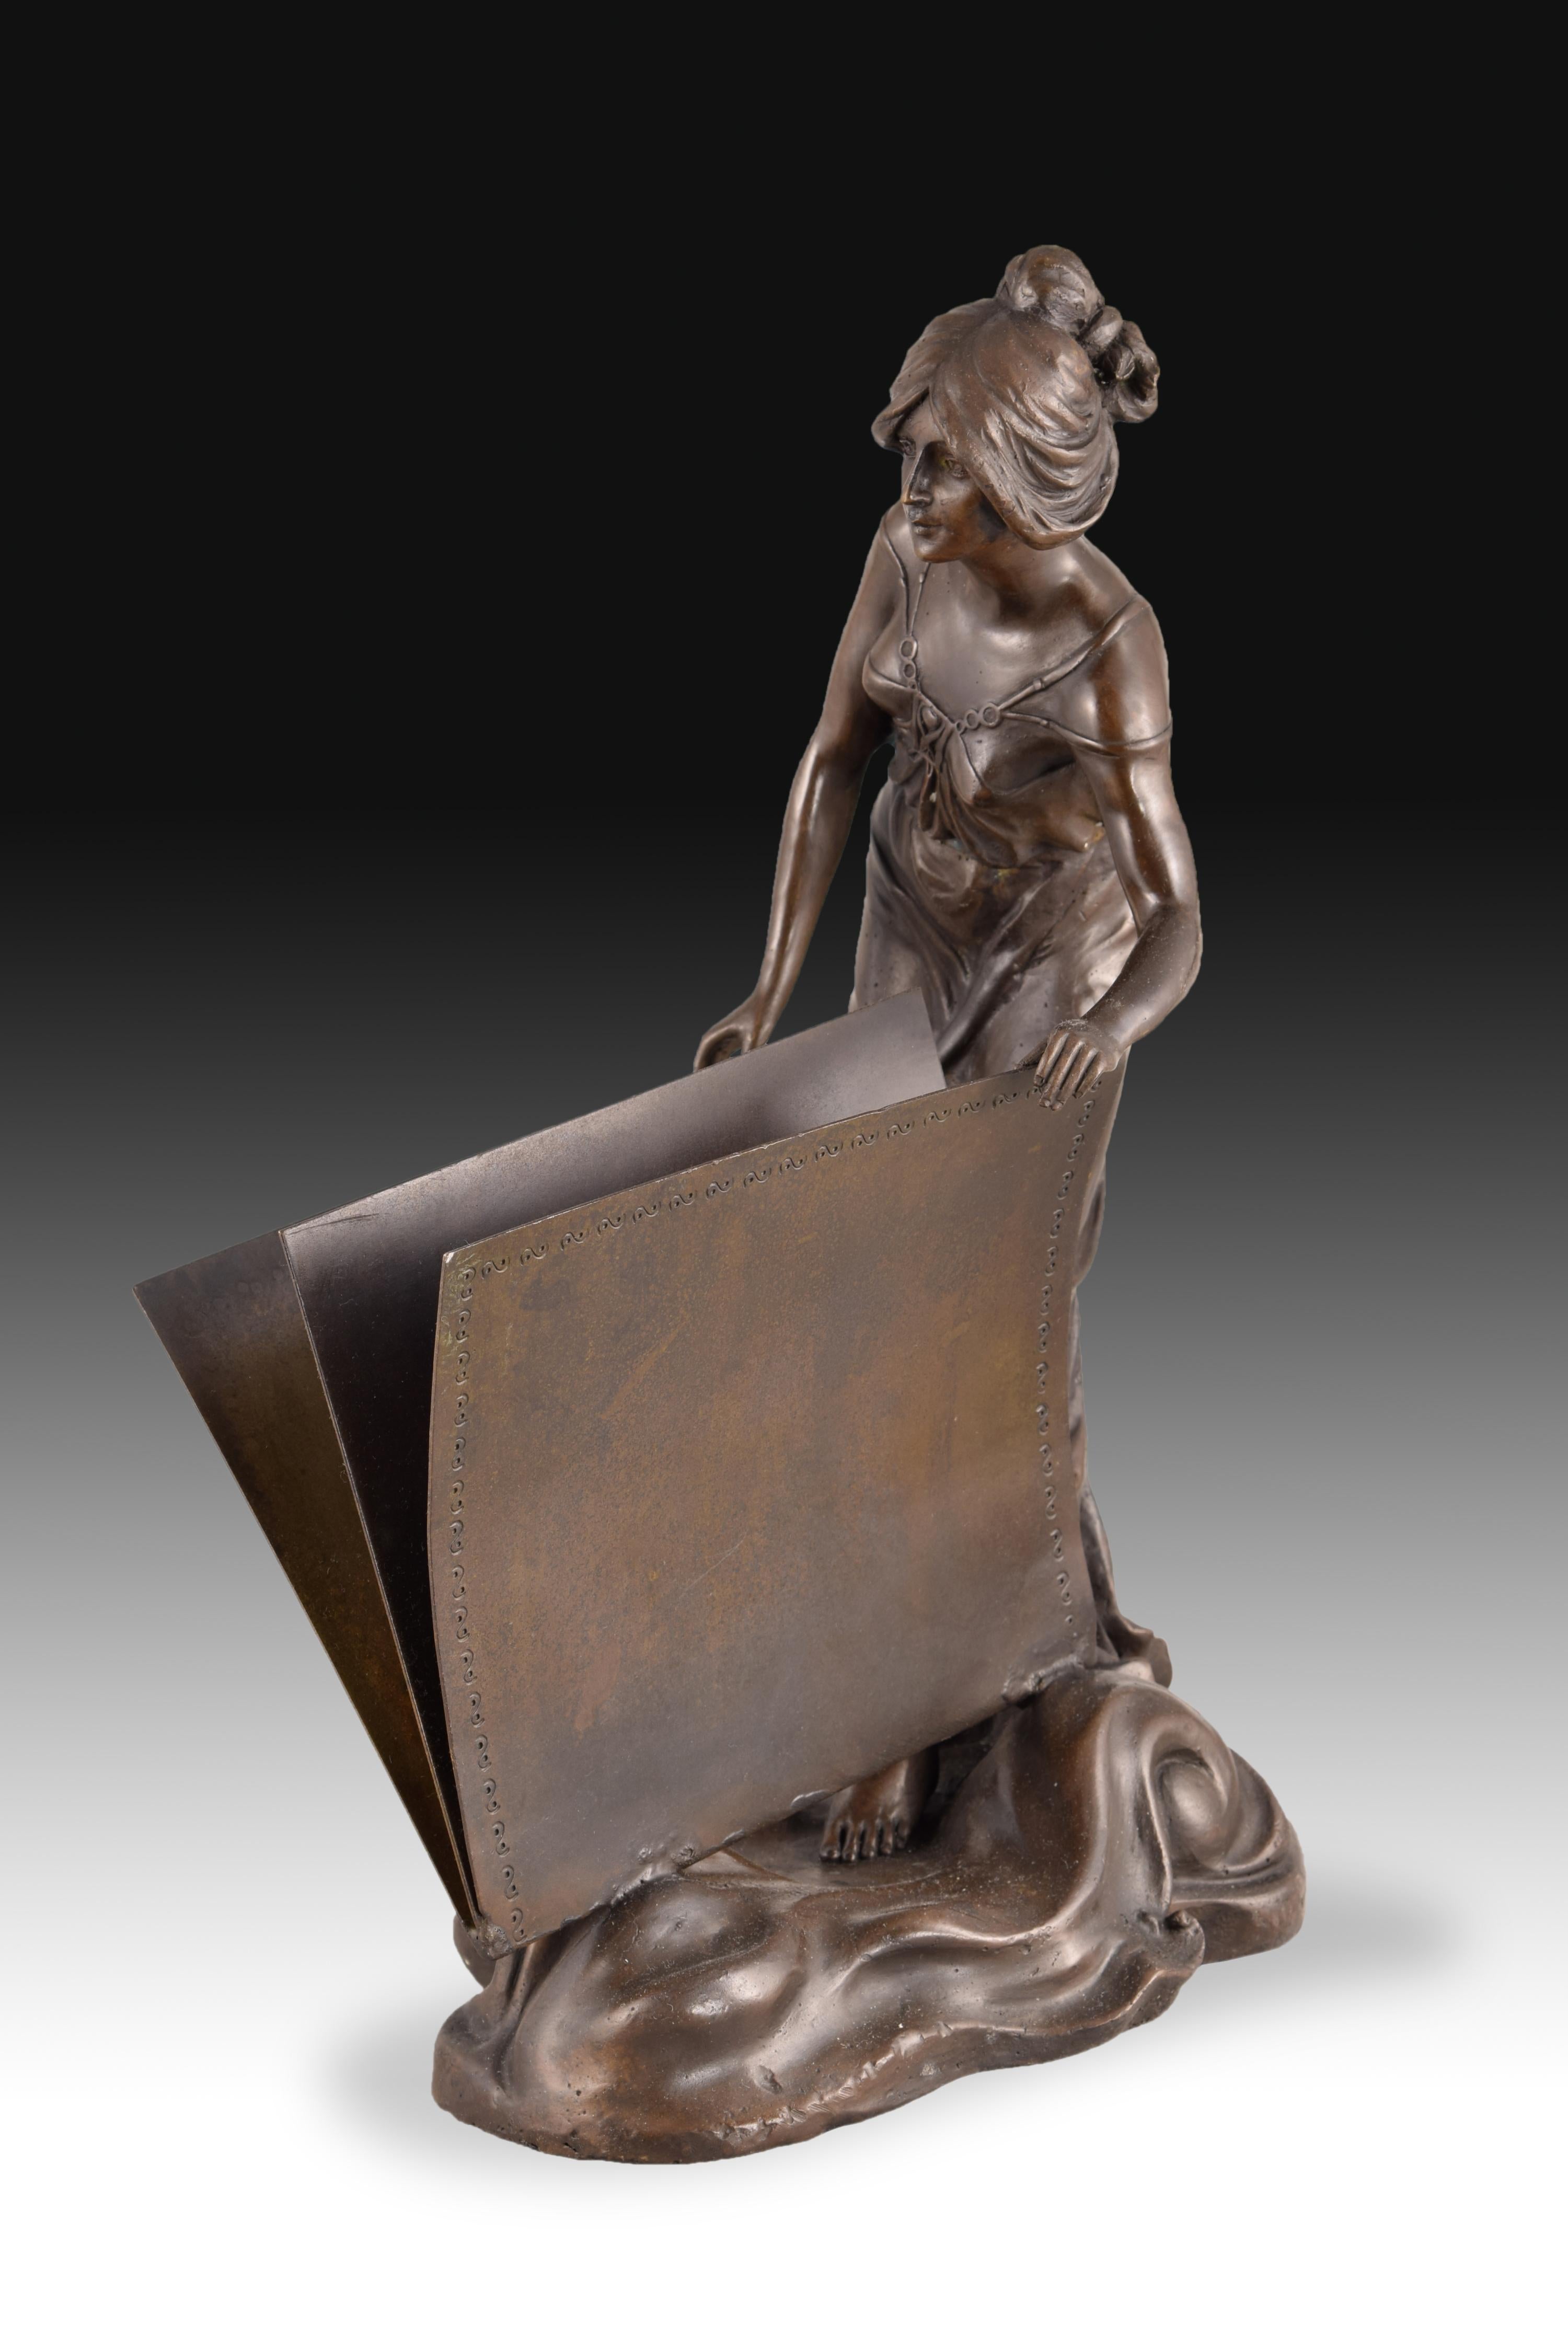 The base of the figure has been treated by providing a series of undulations. Above it, the lady stands, opening a large book. The sculpture is inspired by models created by the Art Dèco style, characteristic of the 1920s and that aspired to create